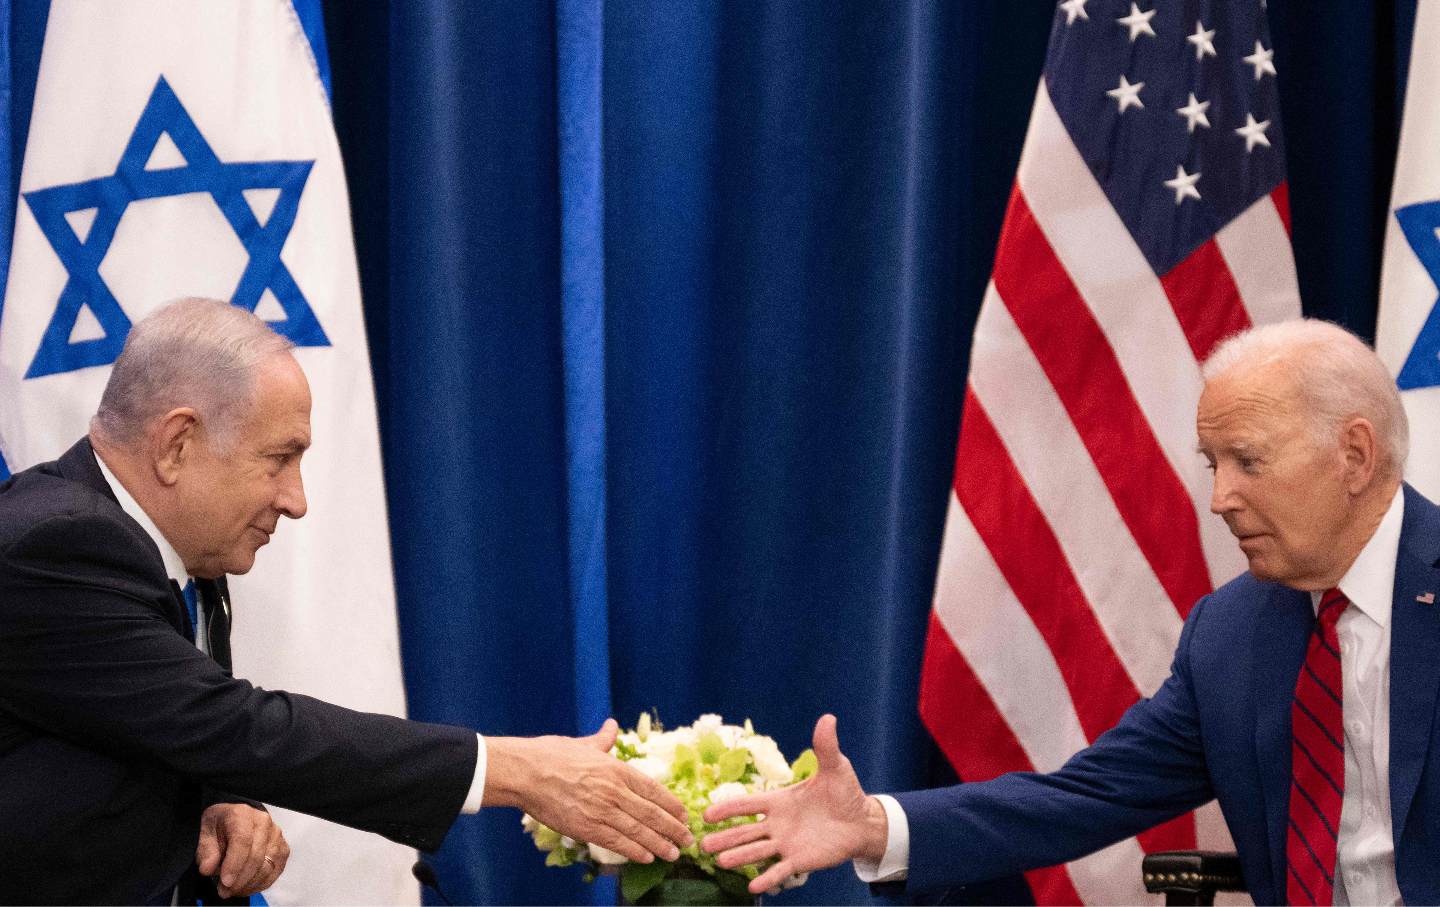 US President Joe Biden shakes hands with Israeli Prime Minister Benjamin Netanyahu as they meet at the 78th United Nations General Assembly in New York City on September 20.